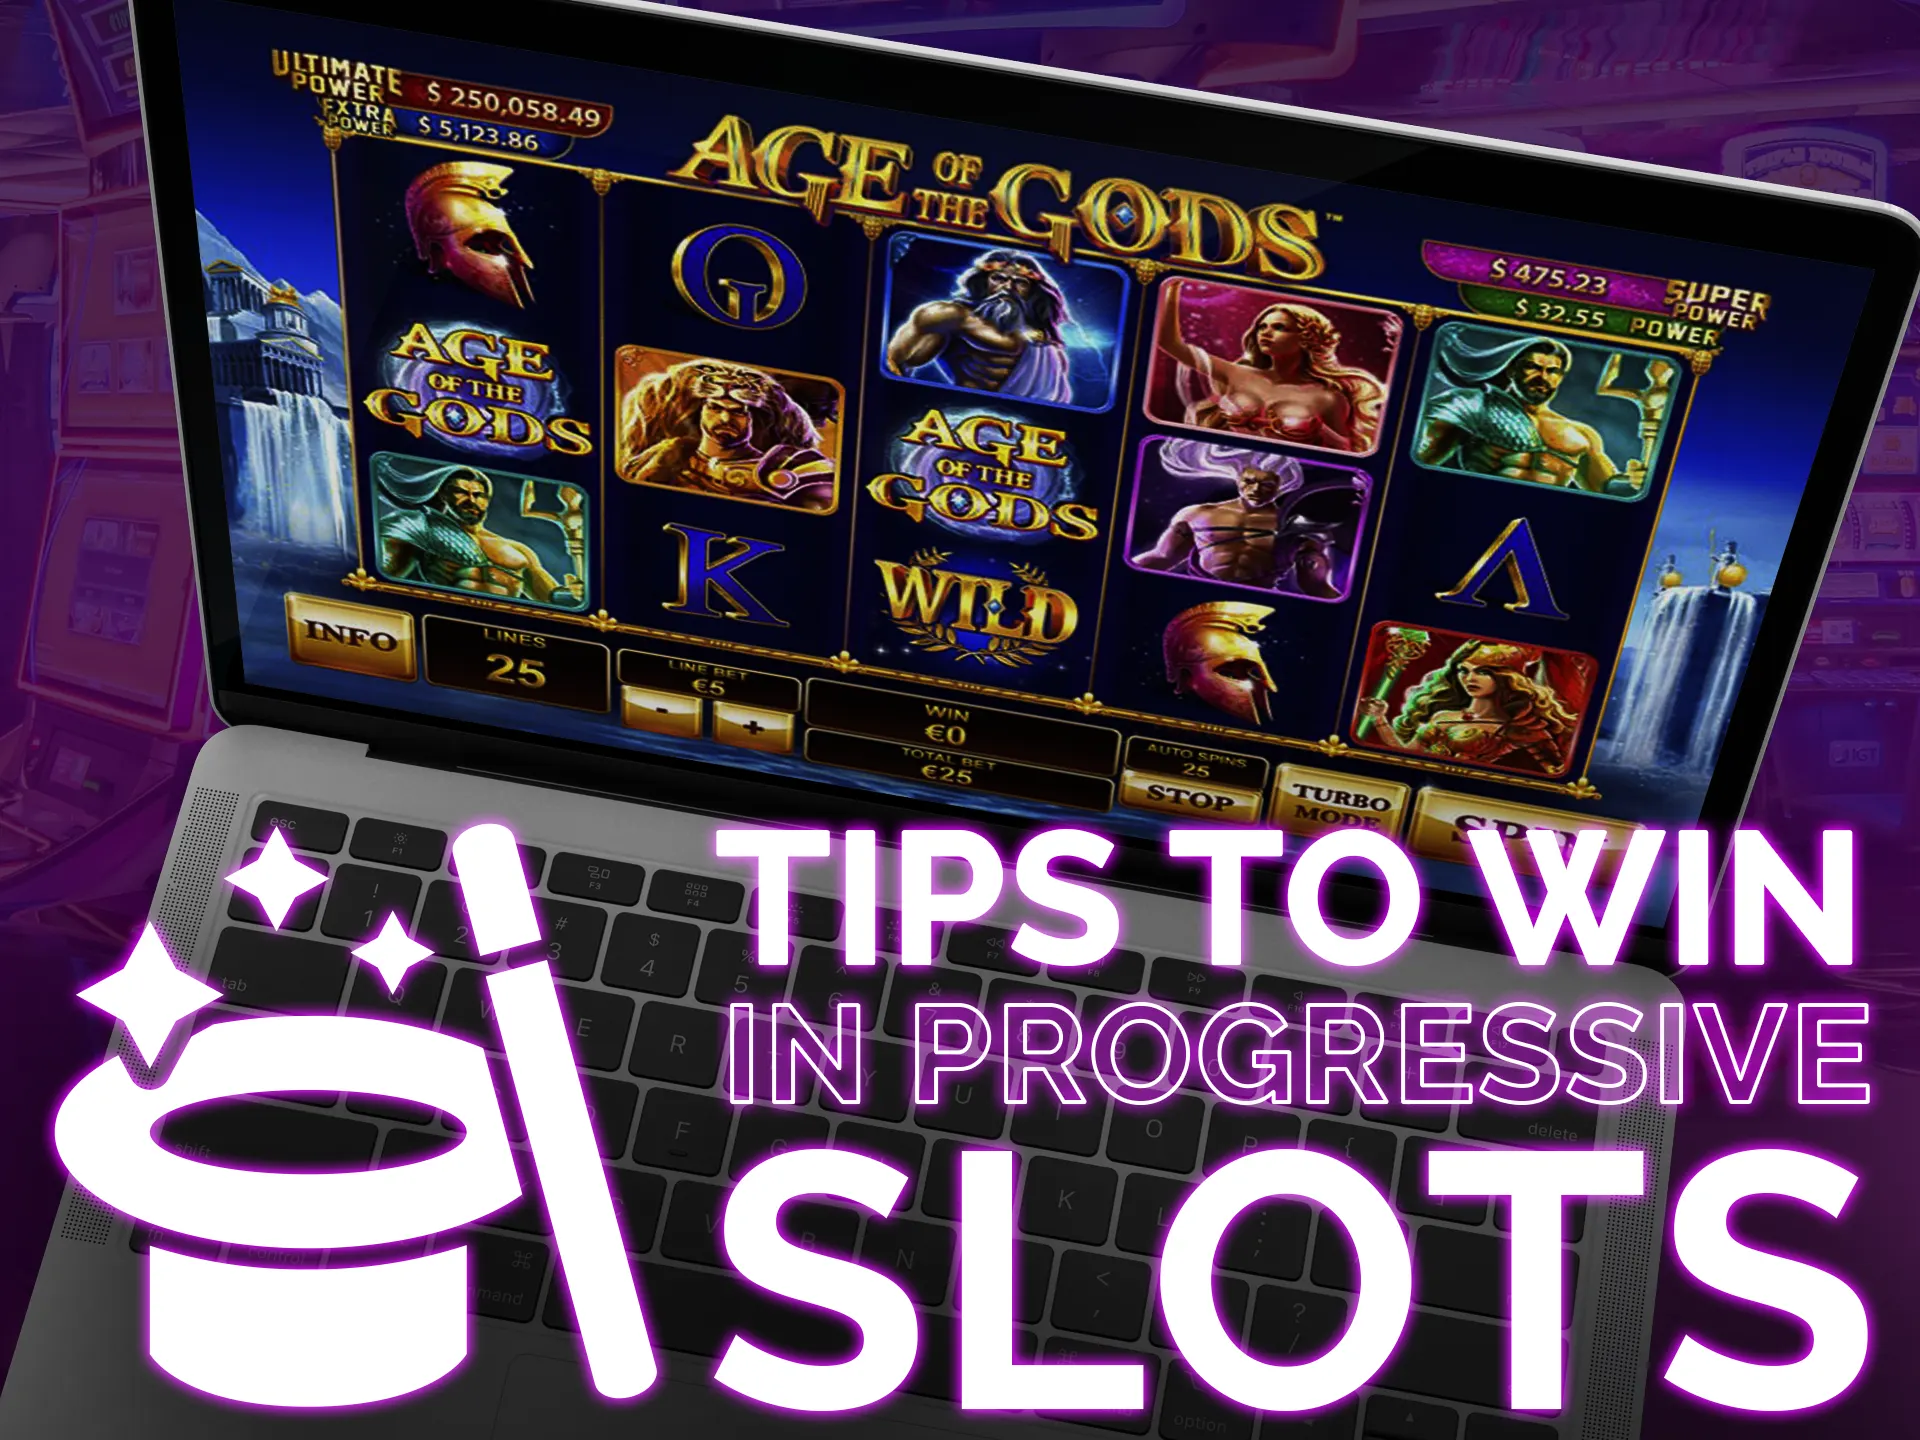 Consider the tips and tricks in our article for playing Progressive Jackpot Slots.